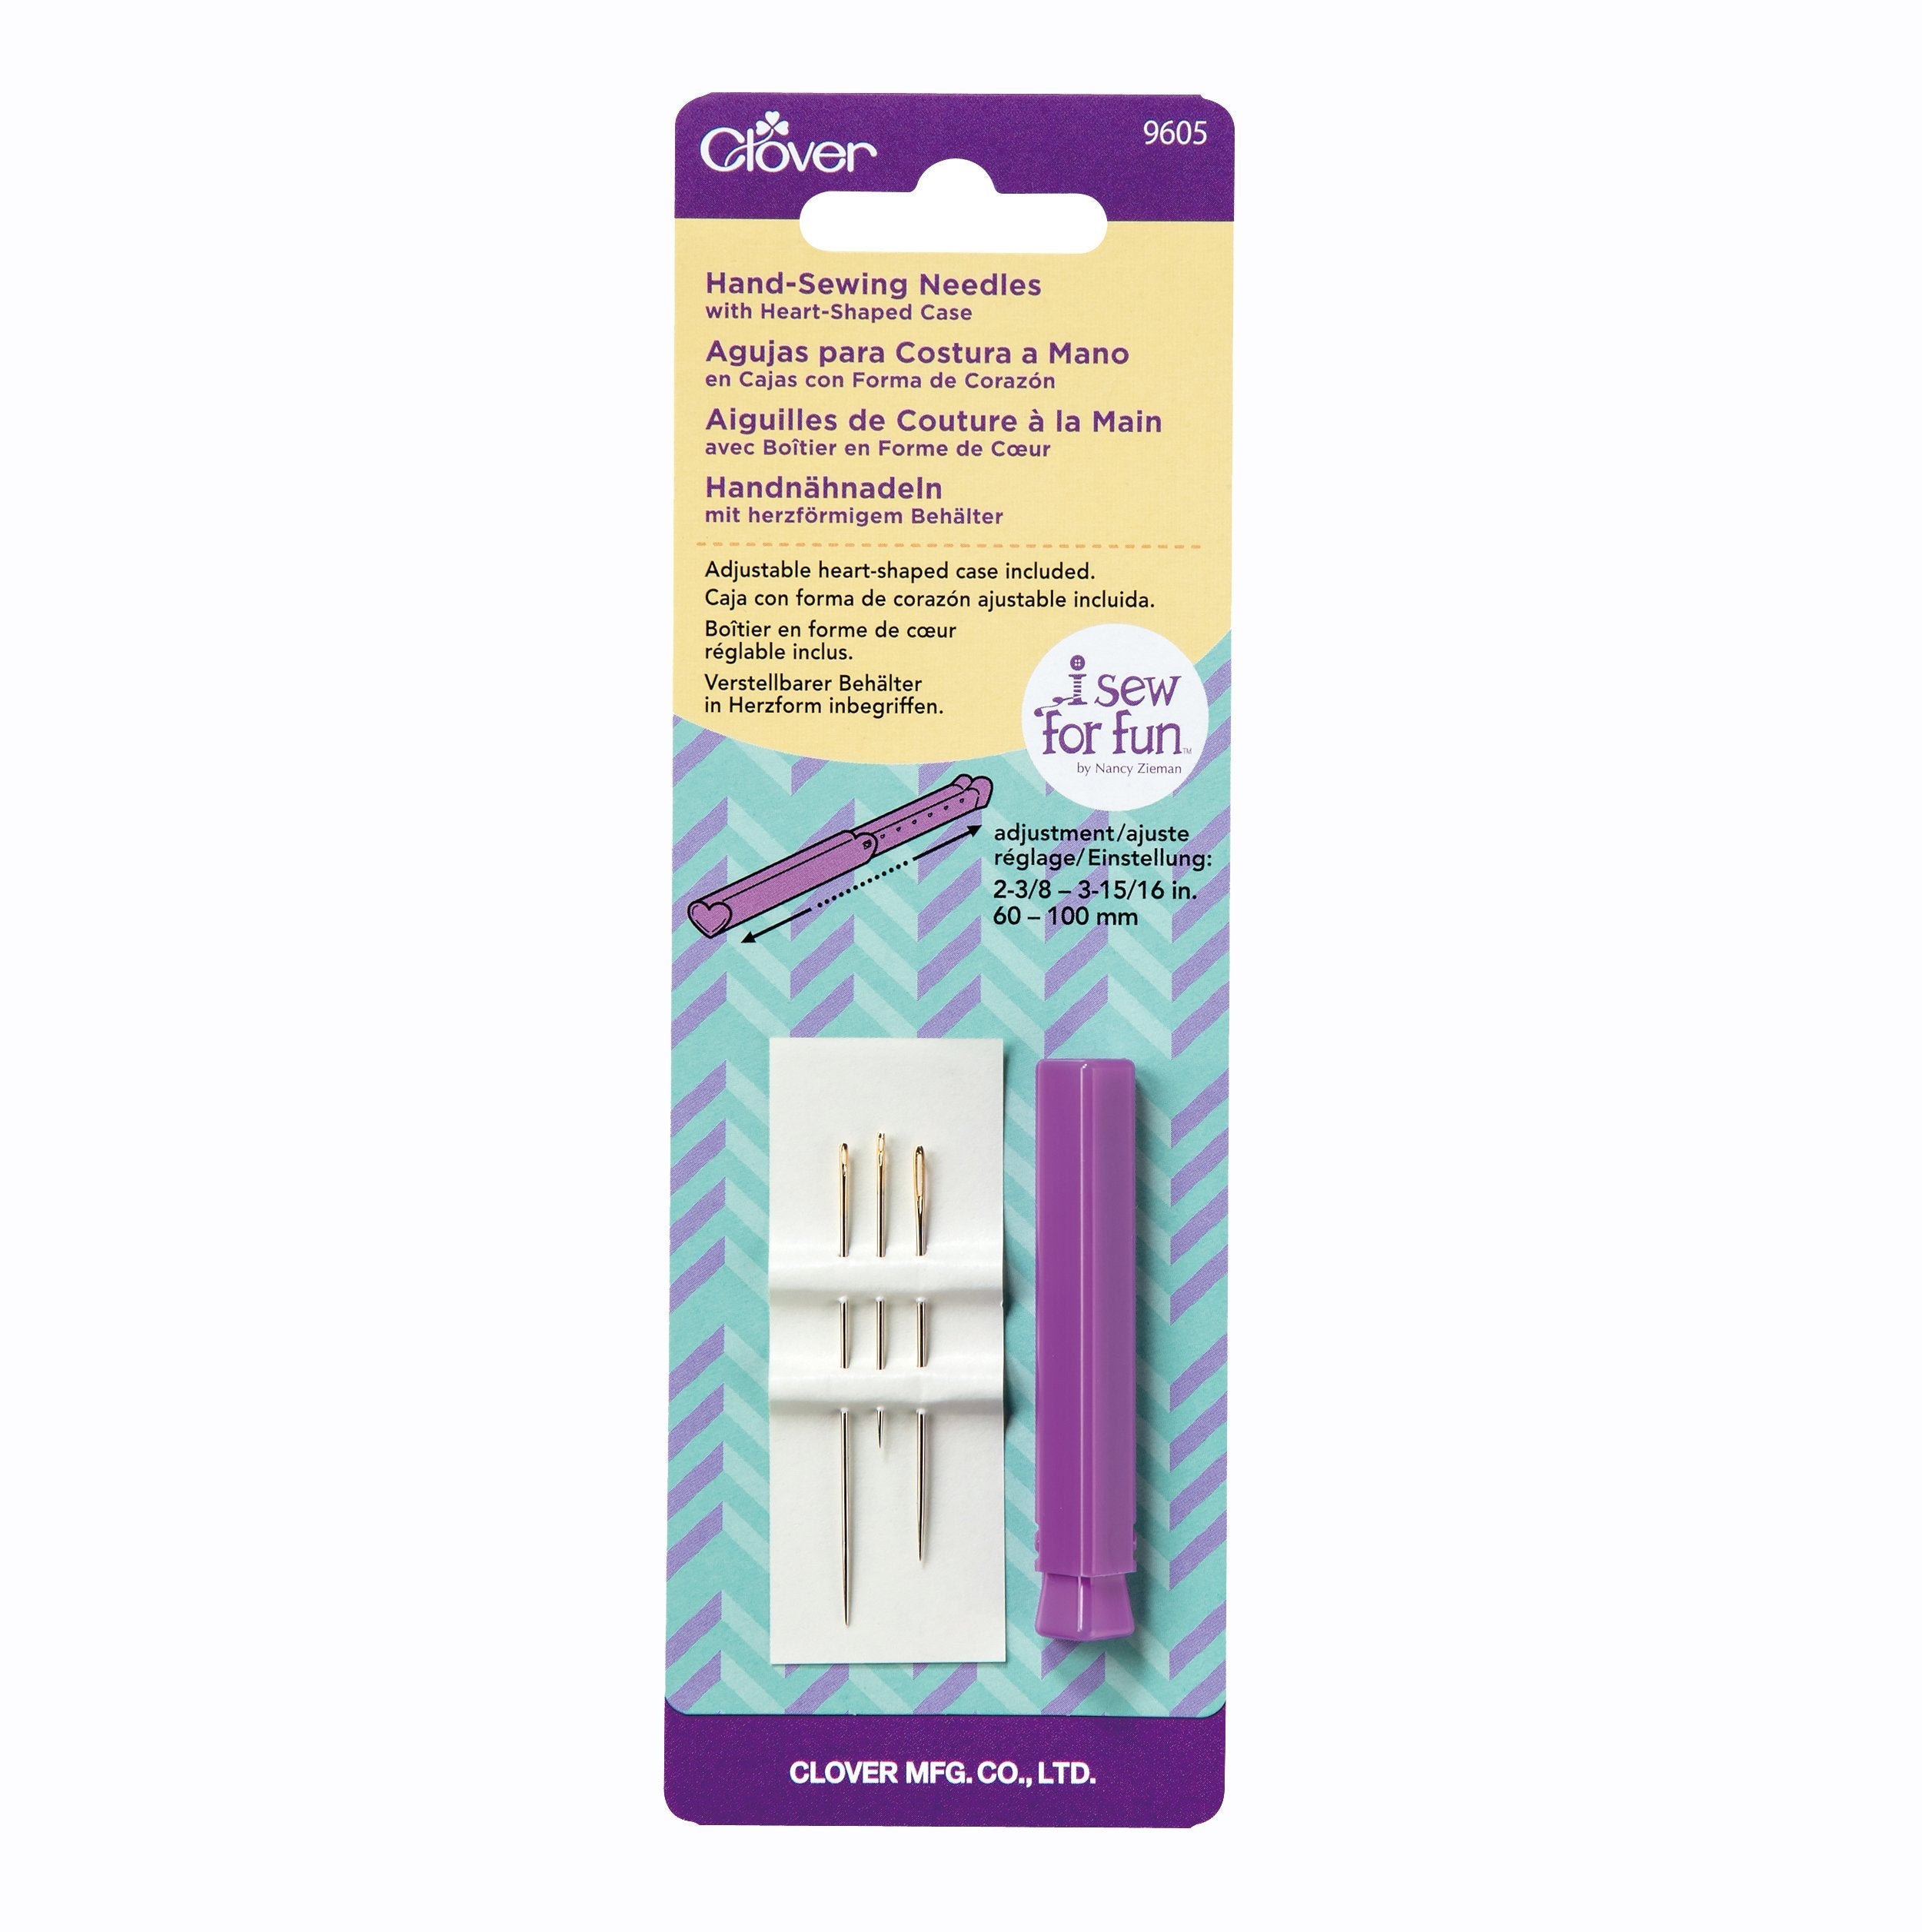 CLV - I Sew for Fun Hand-Sewing Needles with Heart-Shaped Case